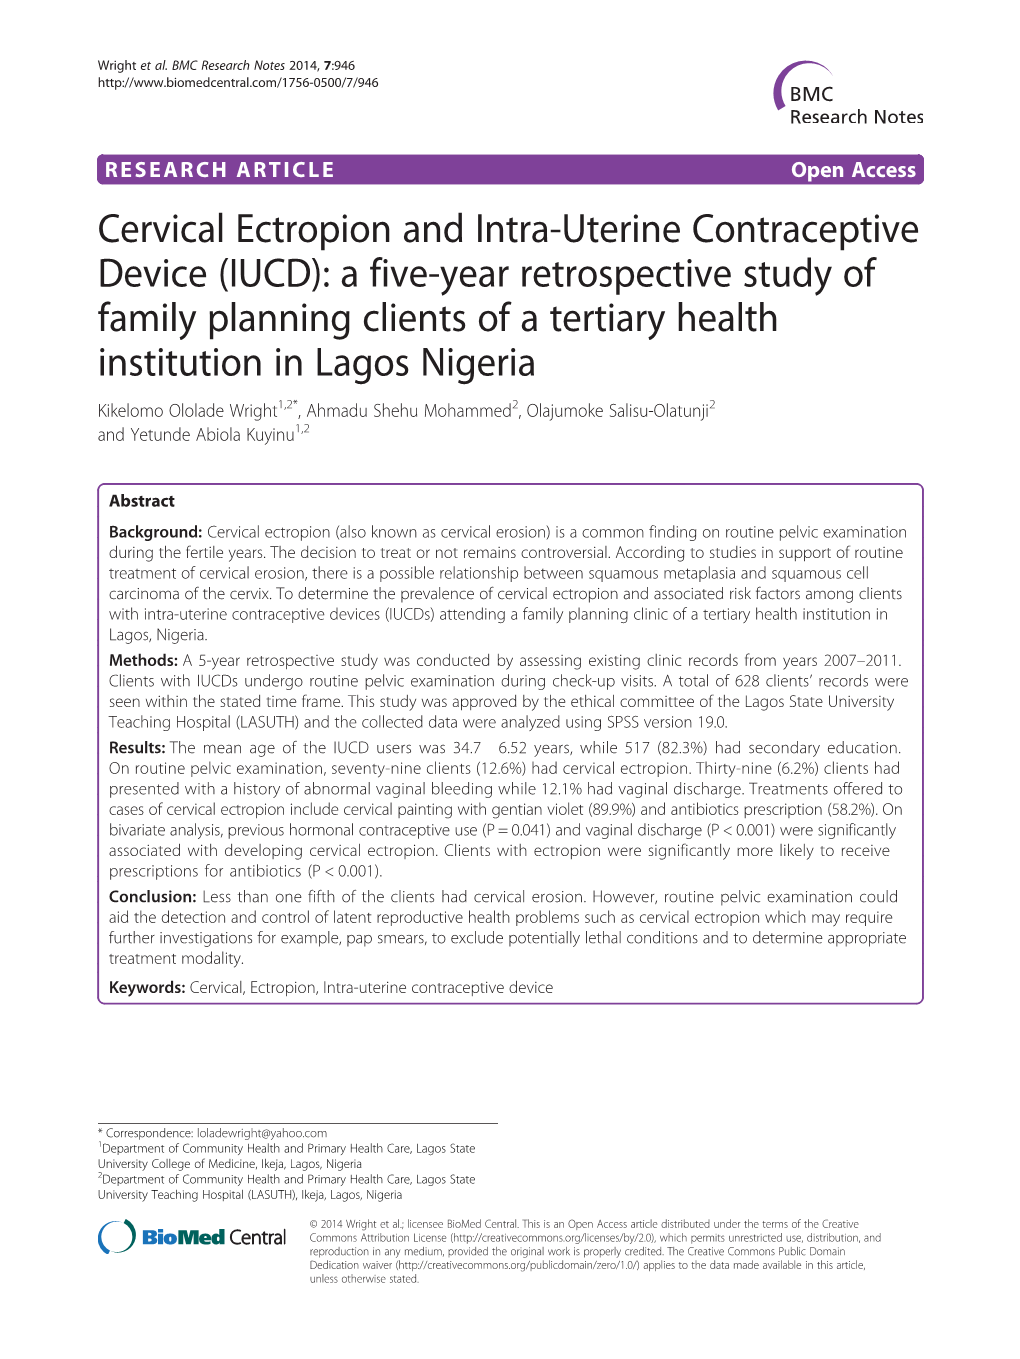 Cervical Ectropion and Intra-Uterine Contraceptive Device